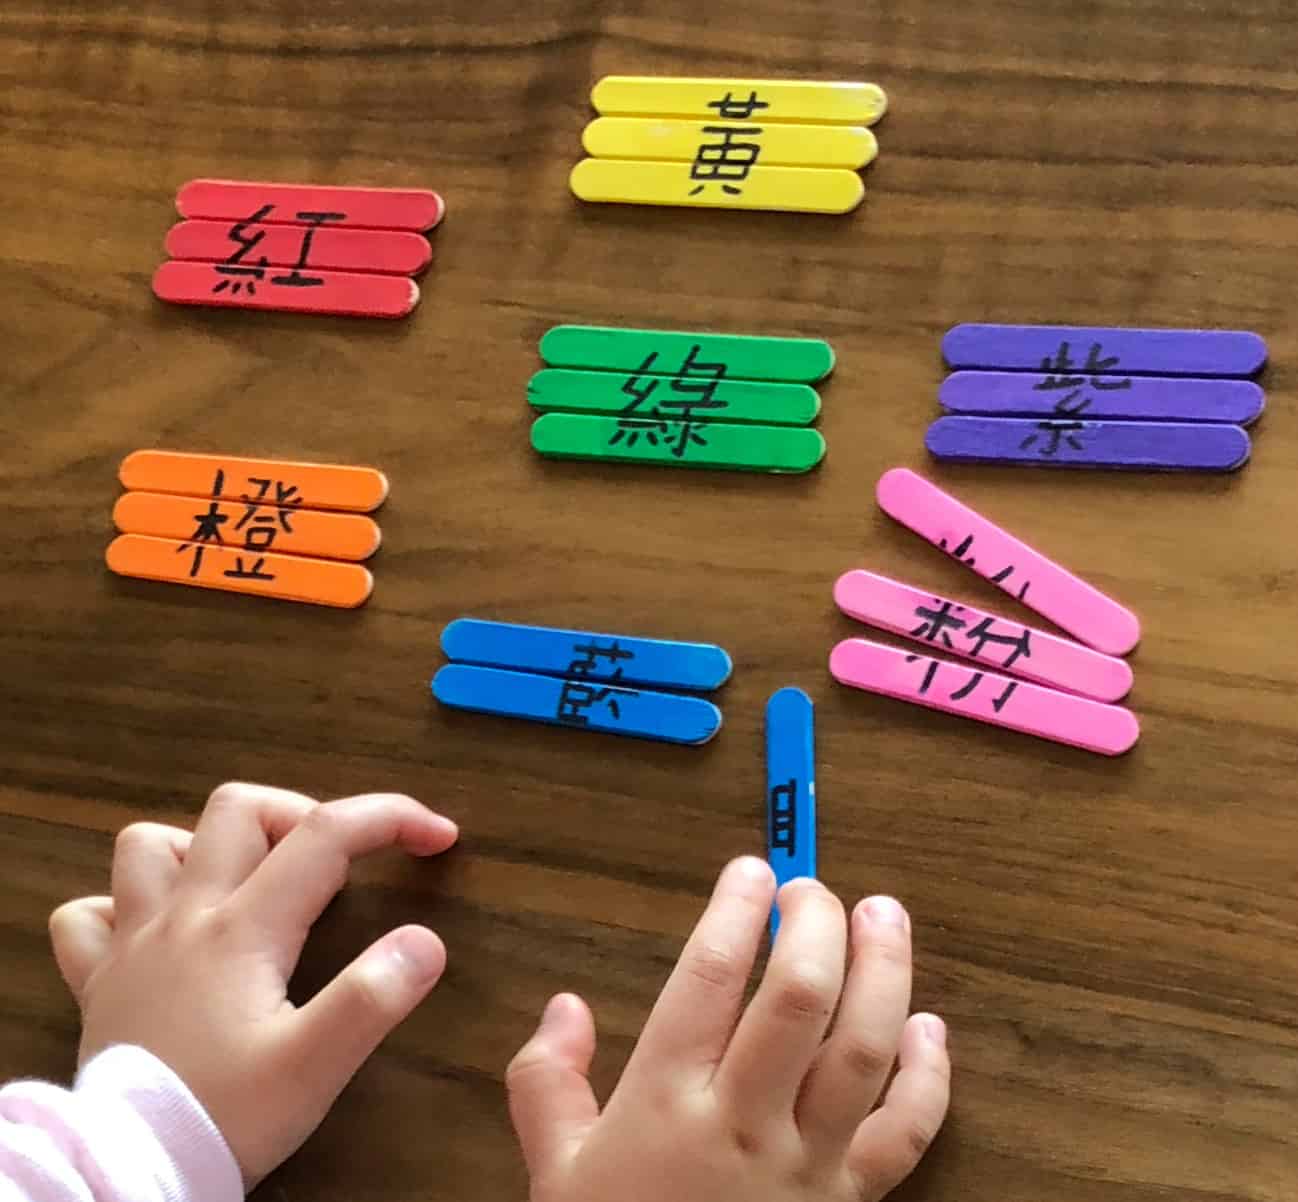 Craft Stick Word Puzzles – A Fun Way to Learn Color Names in Chinese!